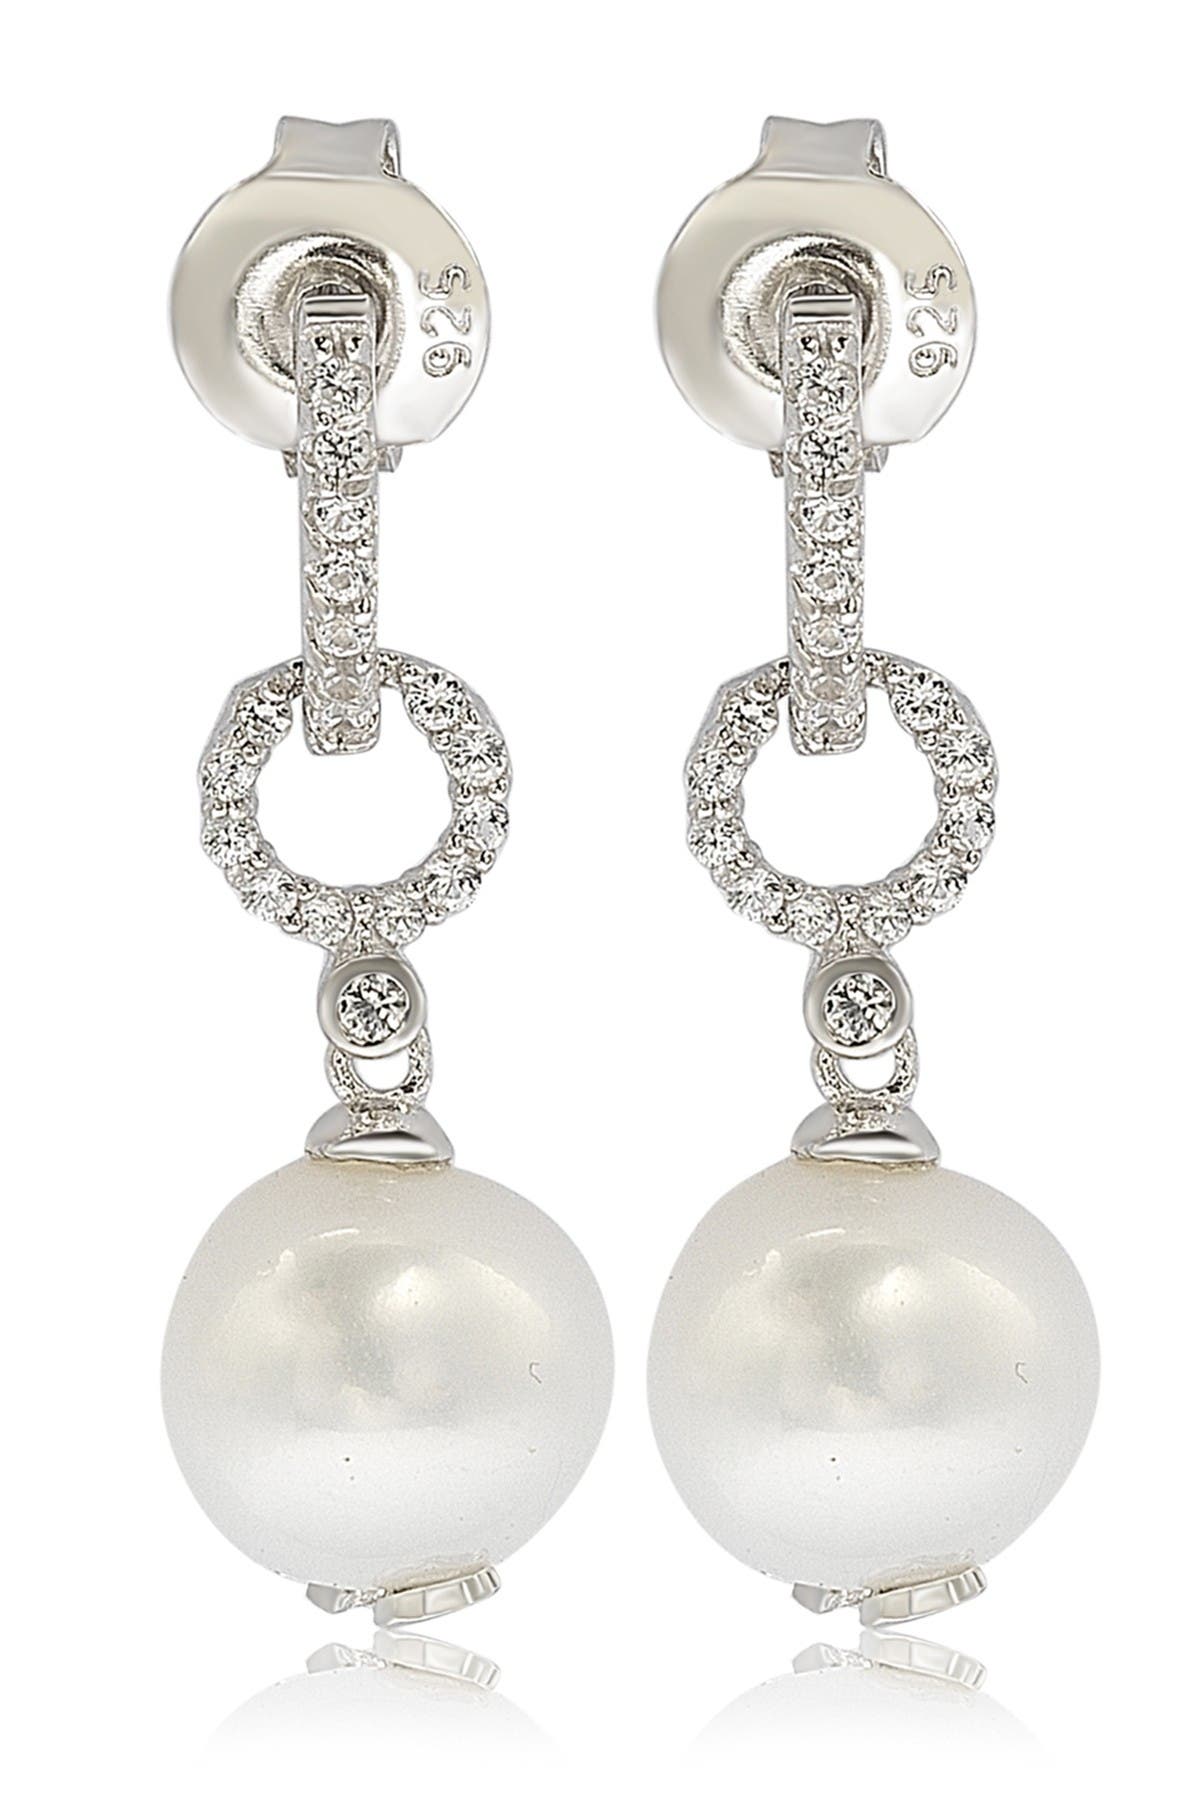 brand new Fresh Water Cultured Pearl drop earring 7.5mm Details about   New without tags 